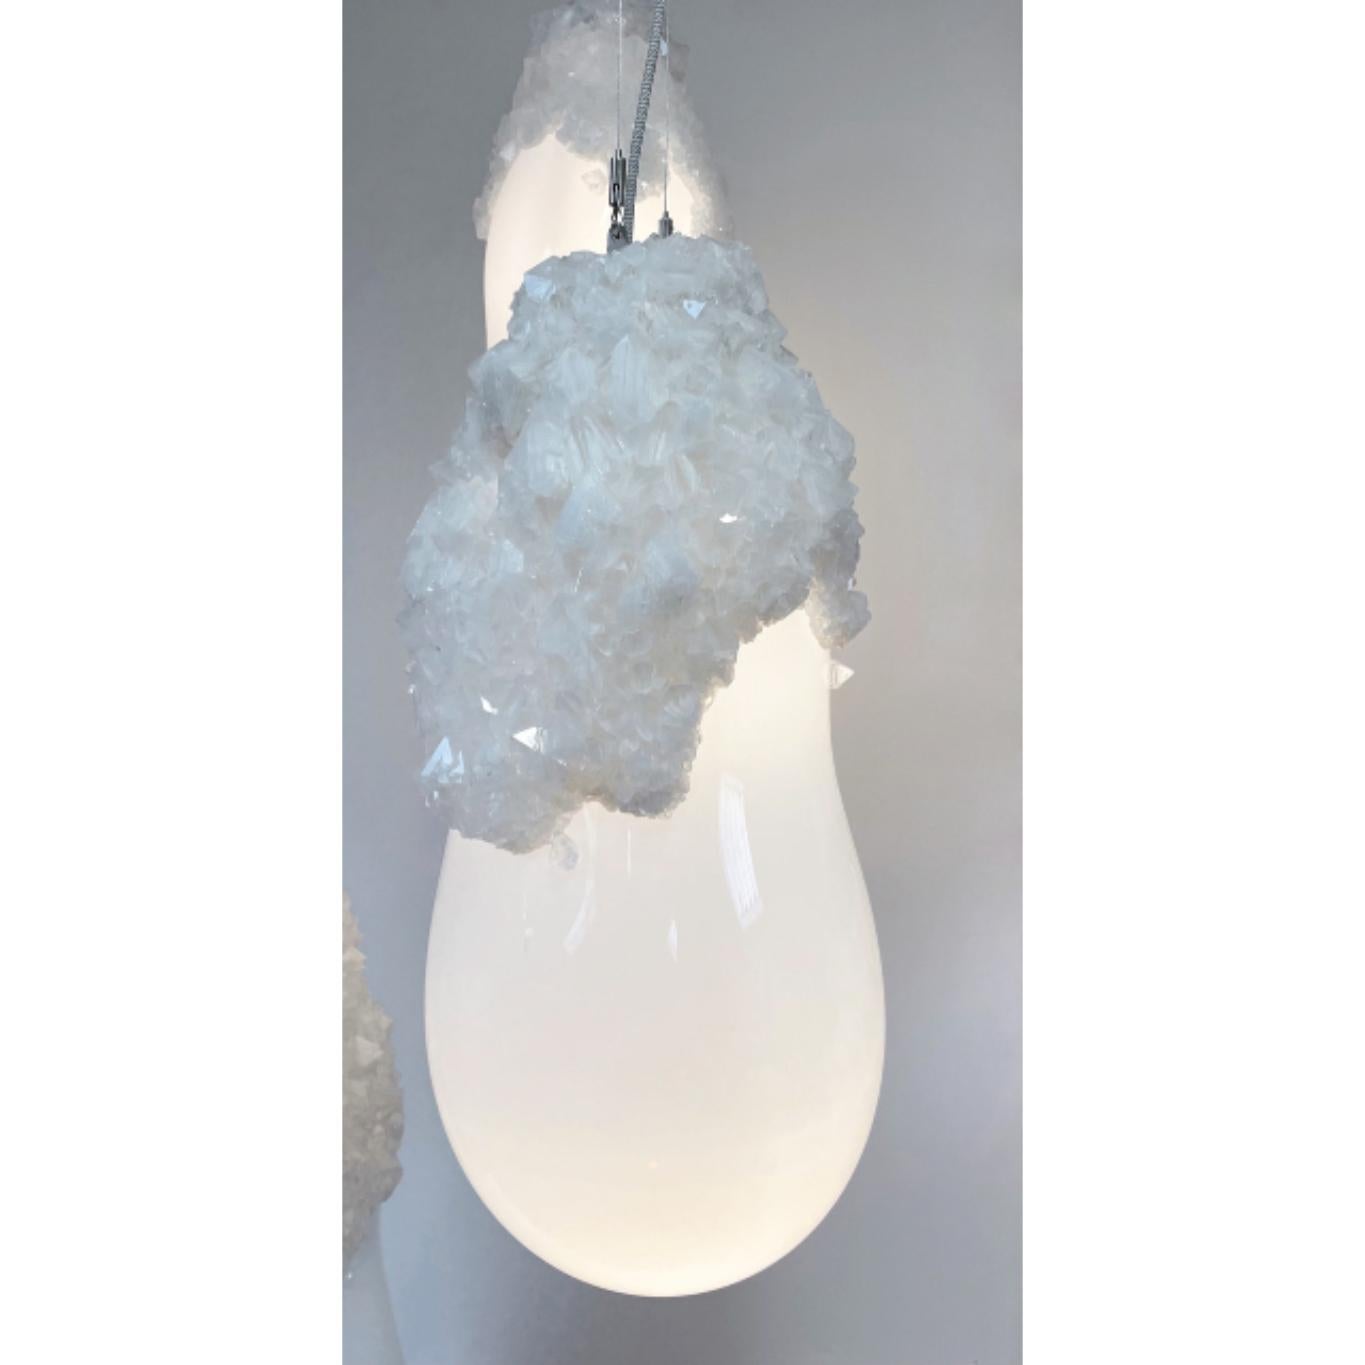 Medium overgrown bubbles by Mark Sturkenboom and Alex de Witte
Dimensions: D 28 x H 70 cm
Material: Mouthblown glass, natural grown crystal, dimmable led, Color White or grey black
Ceiling ornaments can be produced in crystal to extend the Overgrown